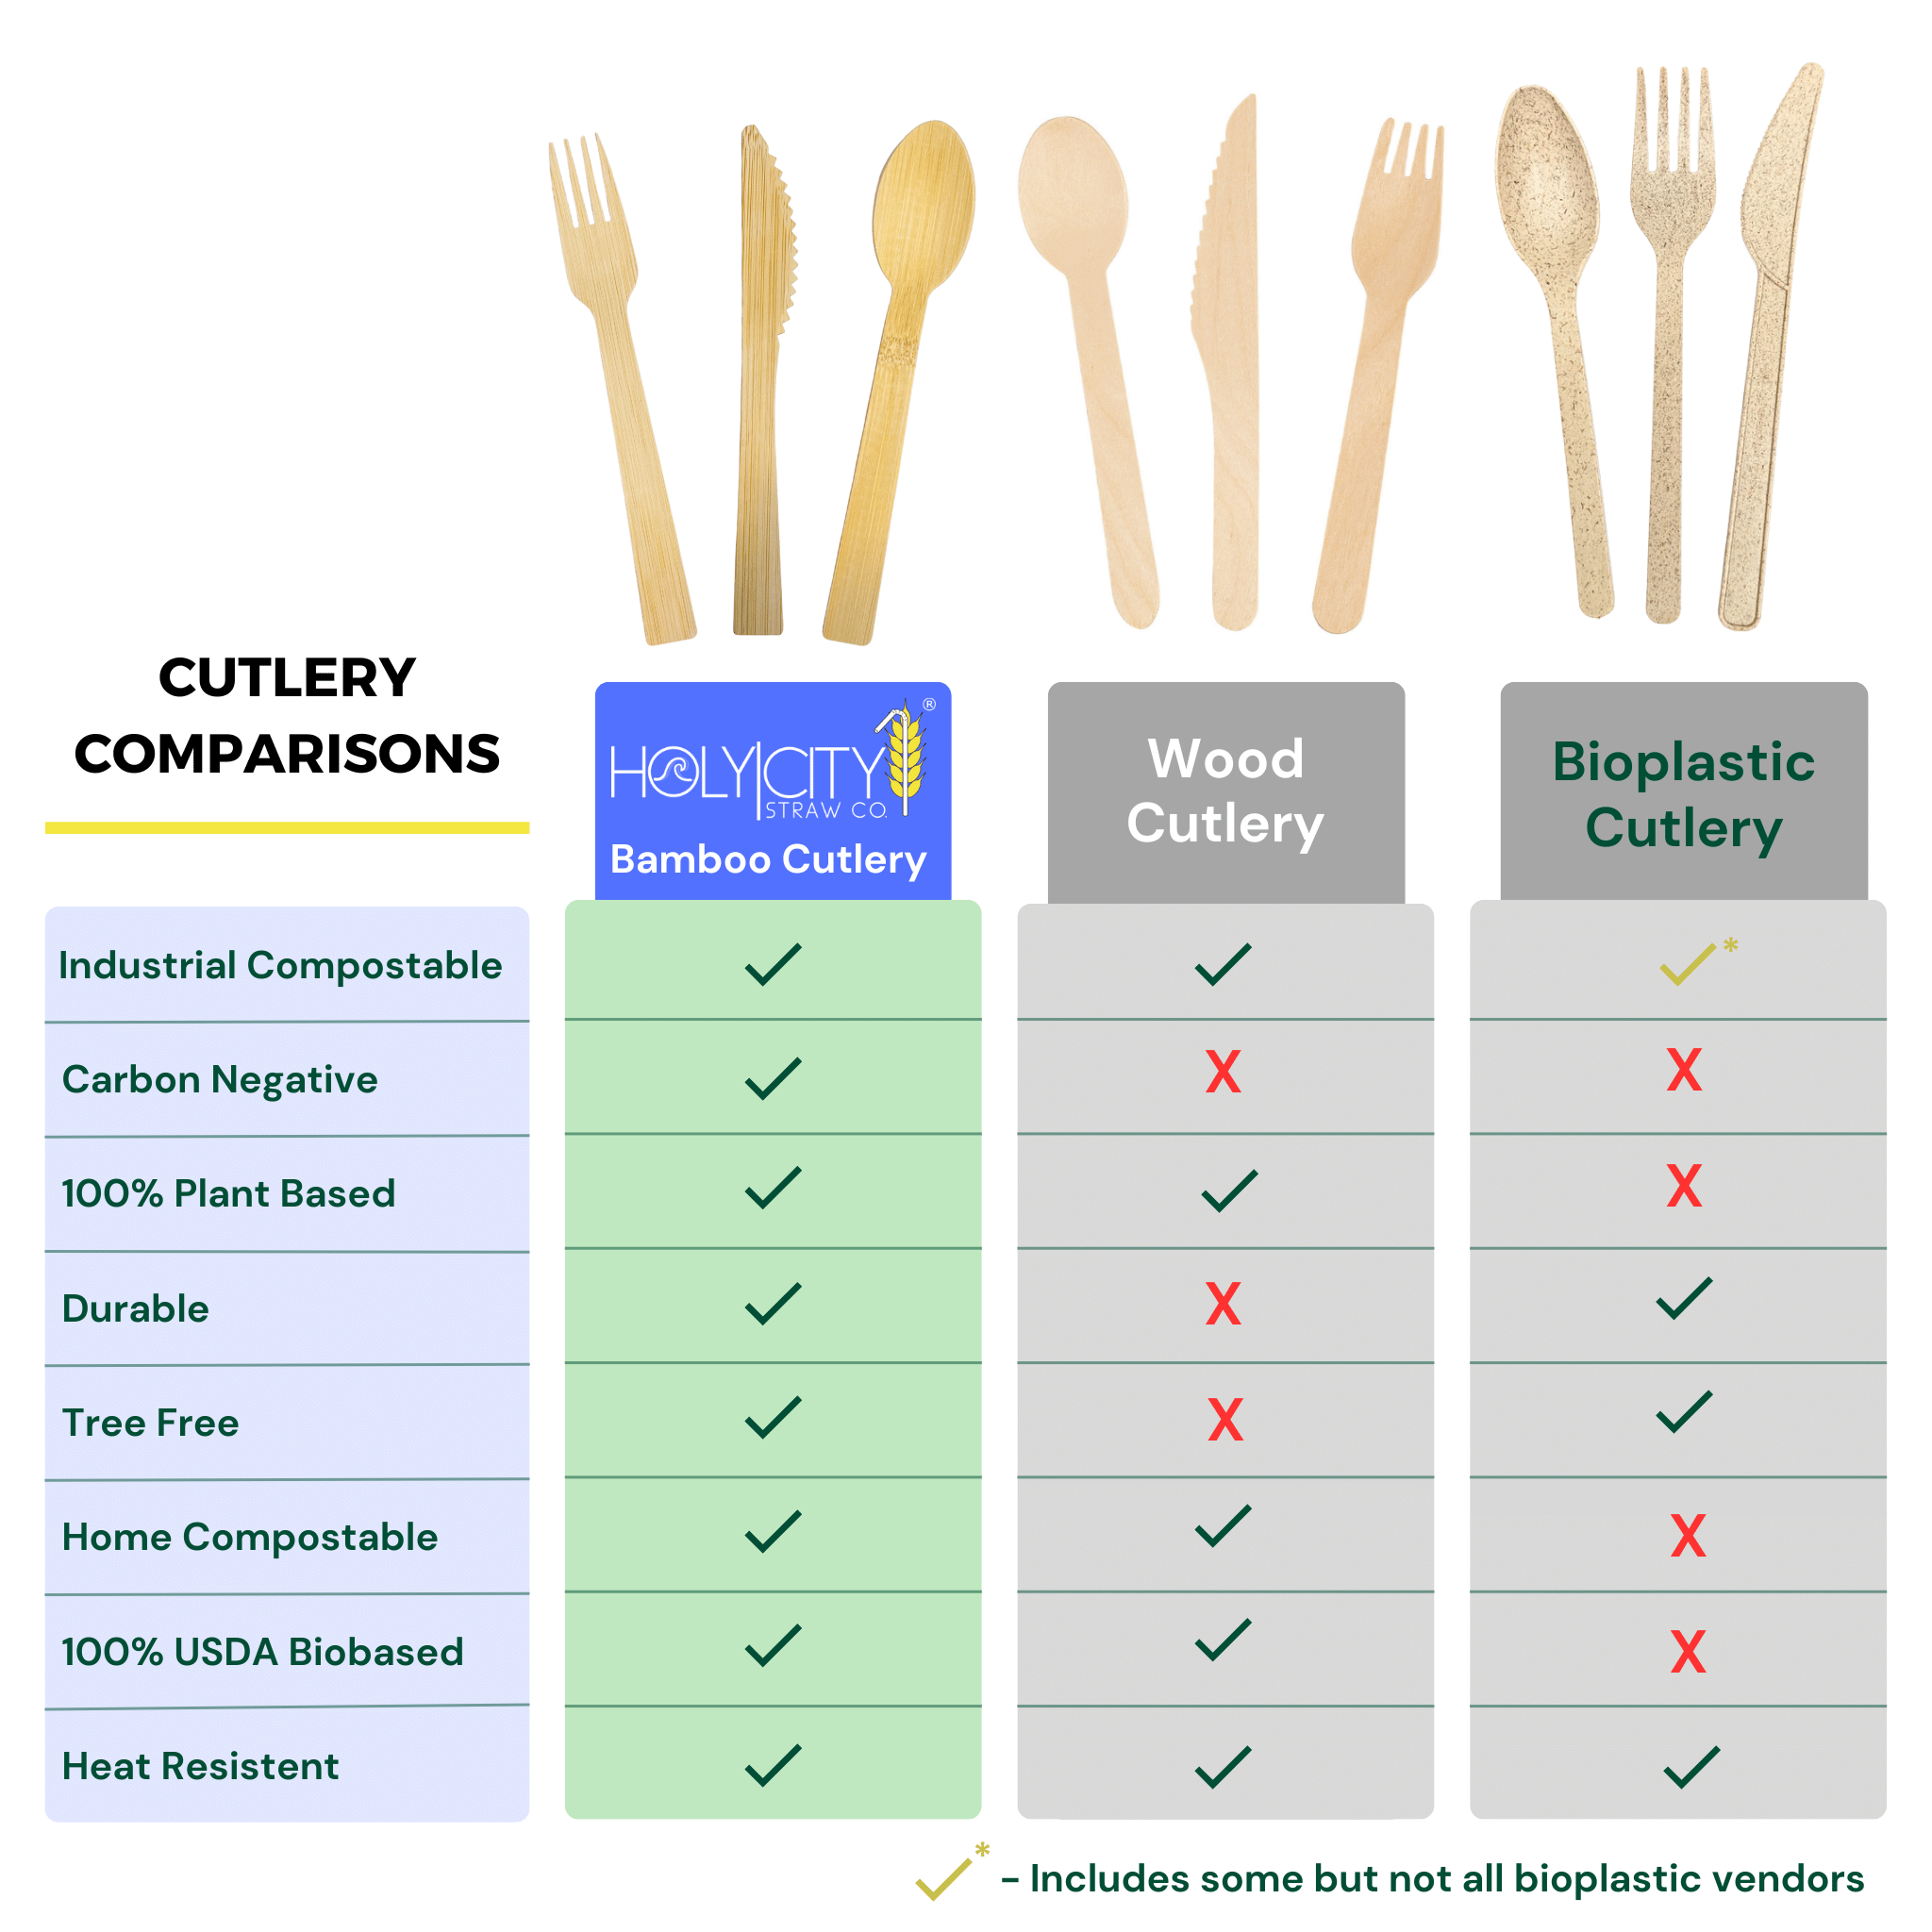 Comparison chart showcasing Holy City Straw Co. bamboo cutlery benefits against wood and bioplastic alternatives highlighting industrial compostability carbon negativity durability